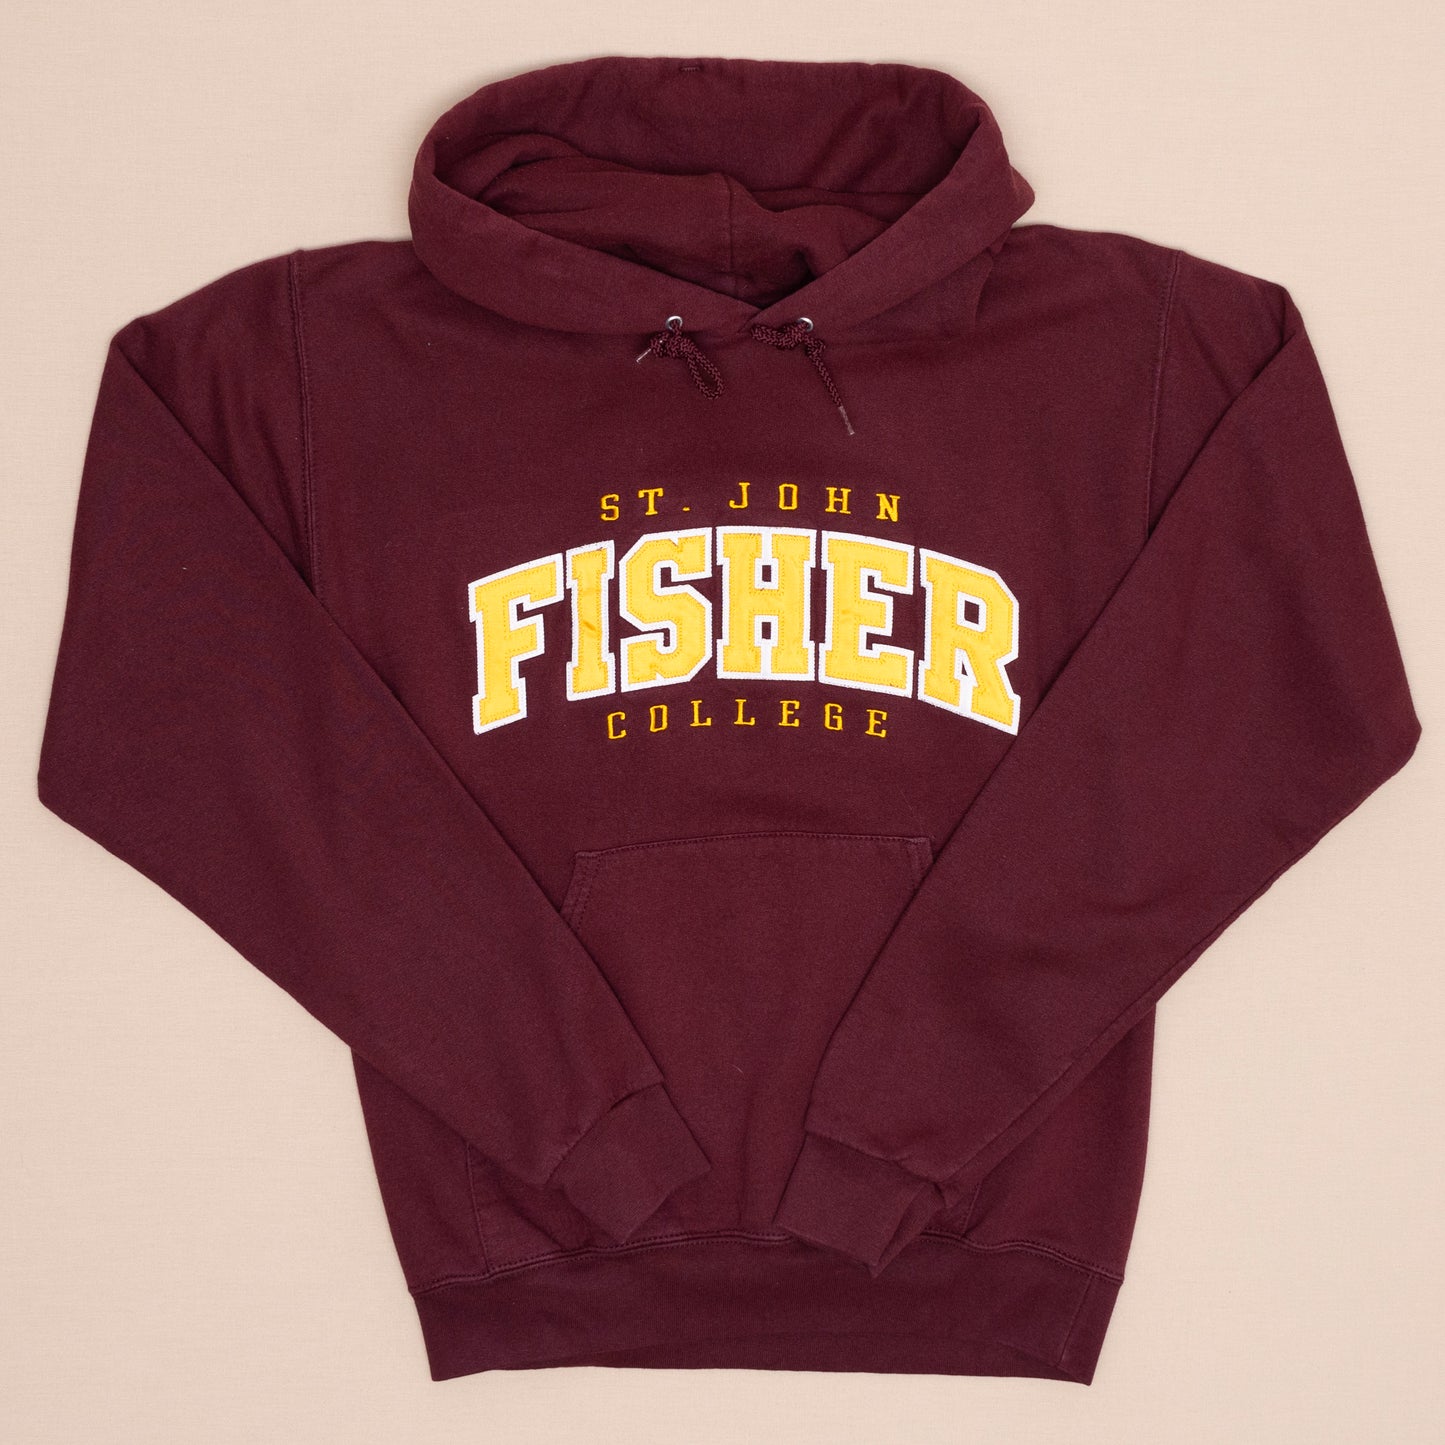 Fisher College Hoodie, S